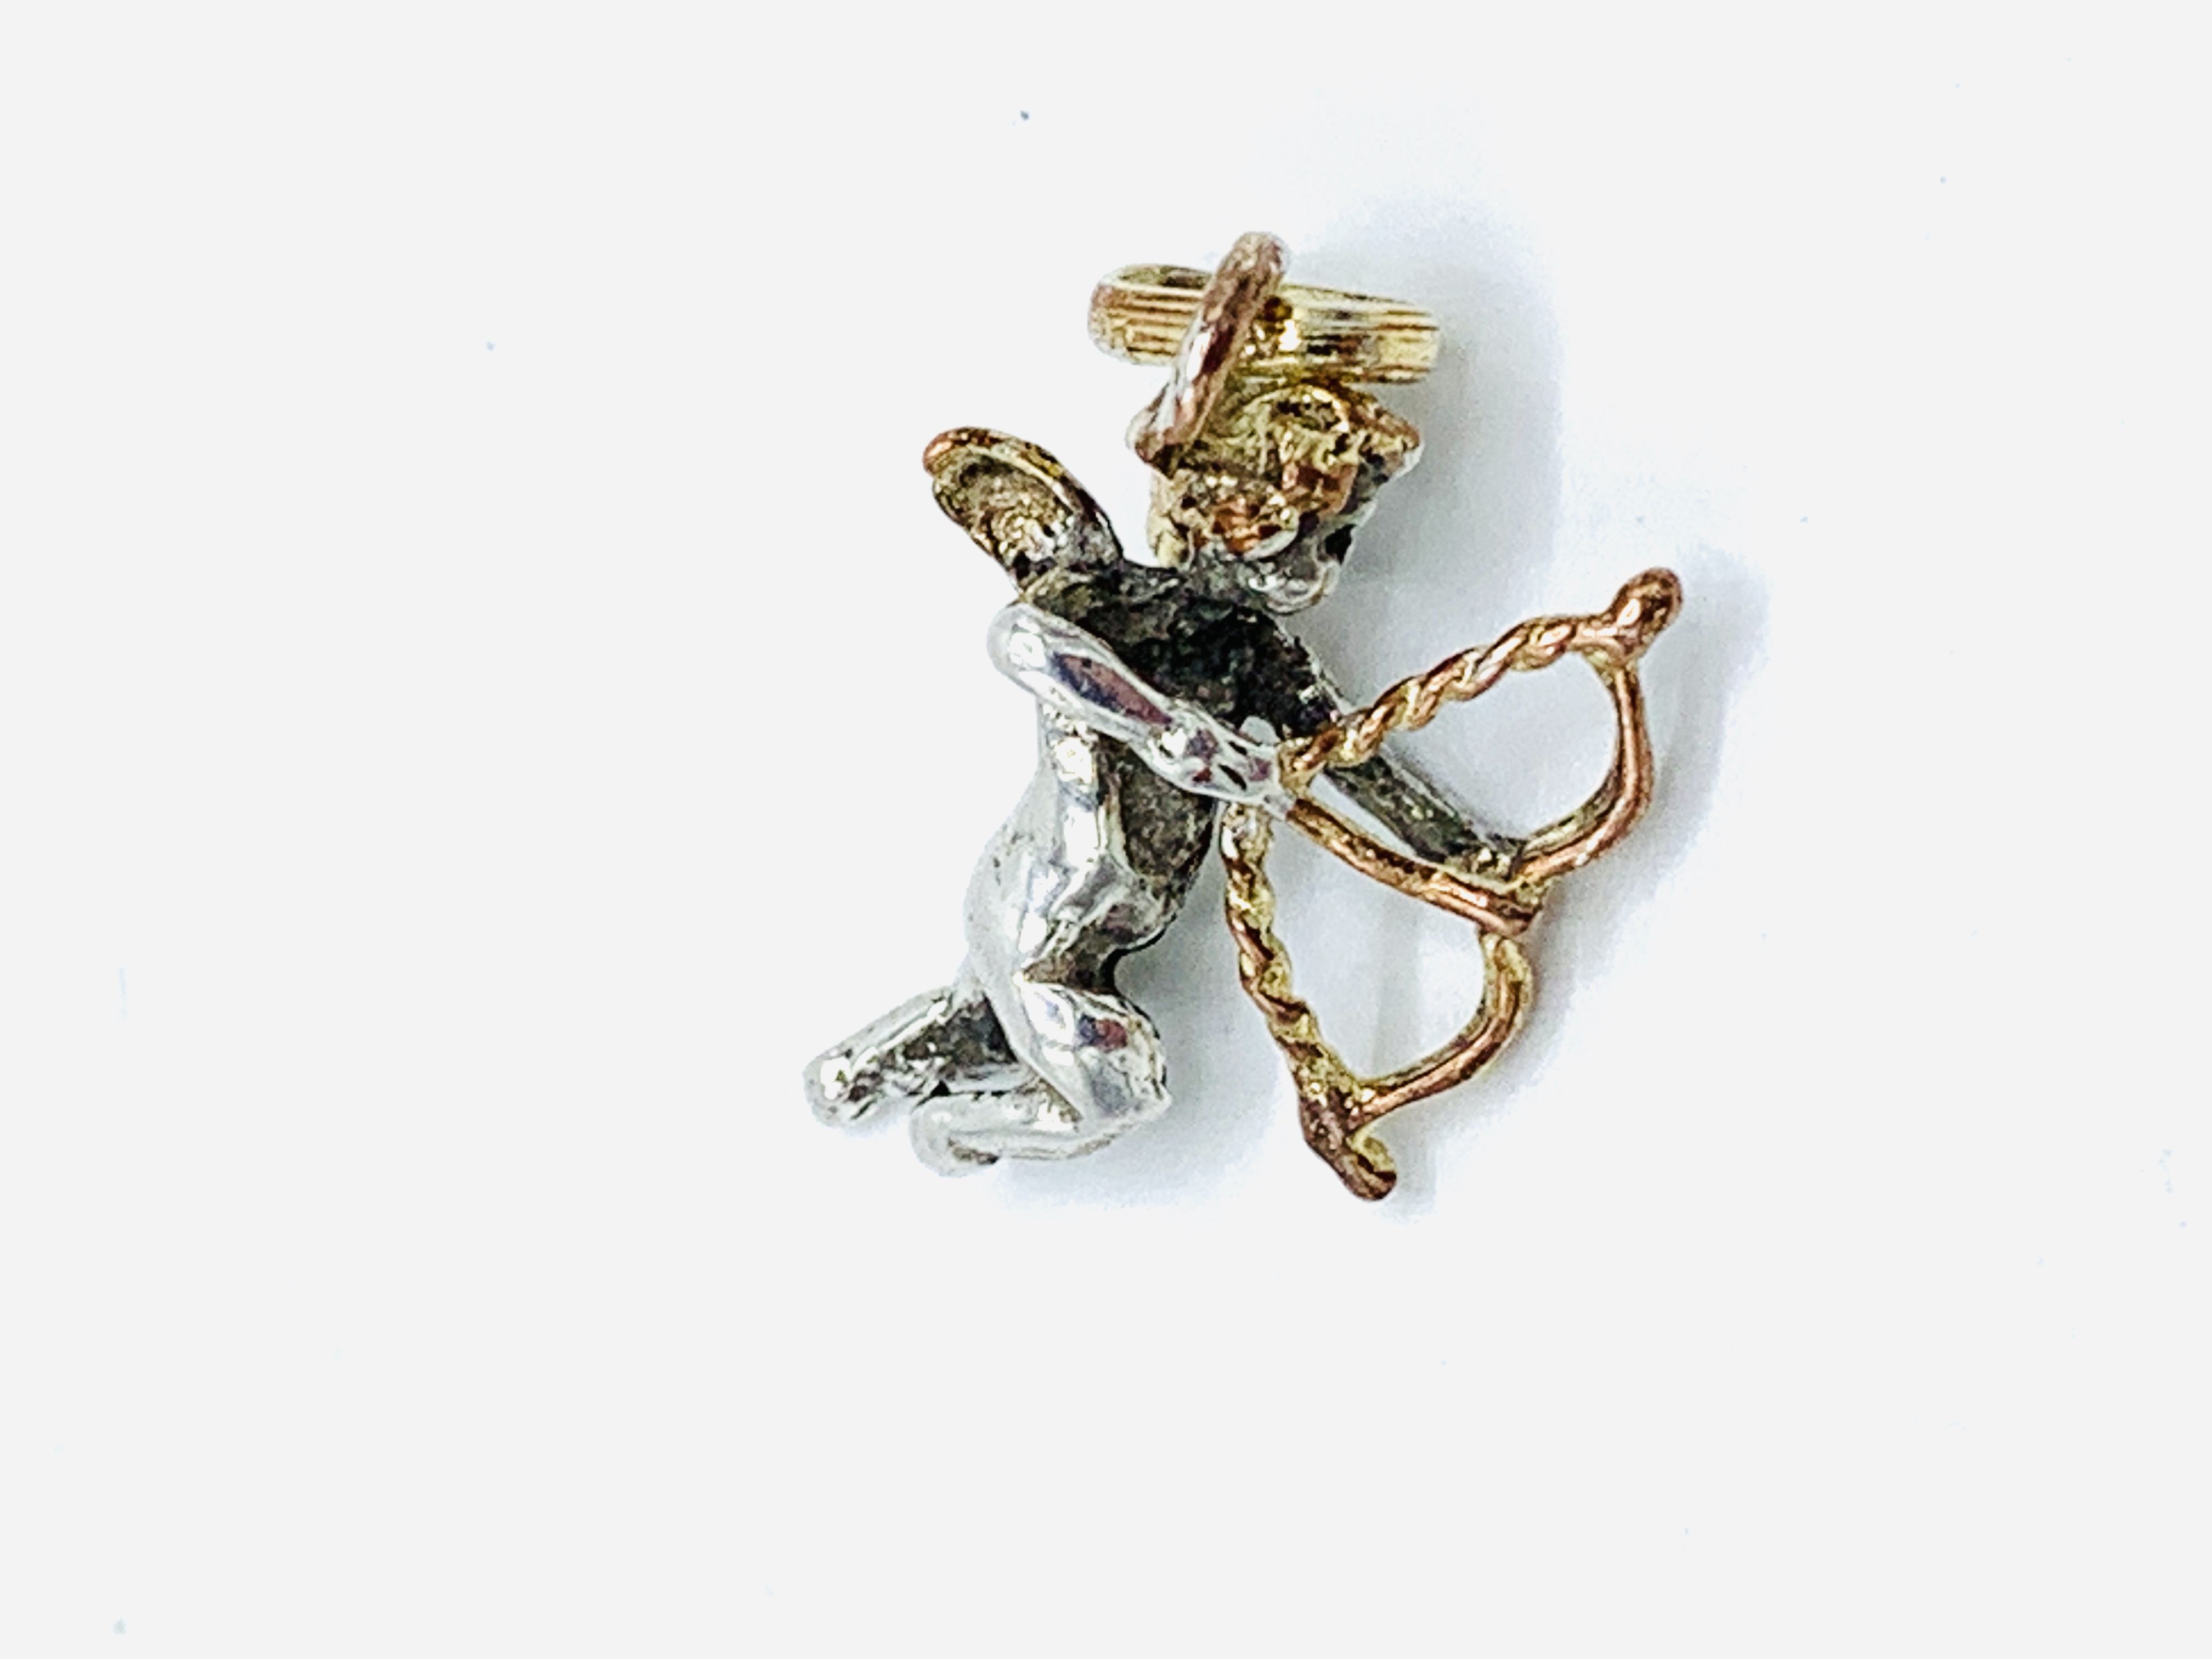 Victorian silver cupid pendant with gilded wings, bow and halo. - Image 4 of 4